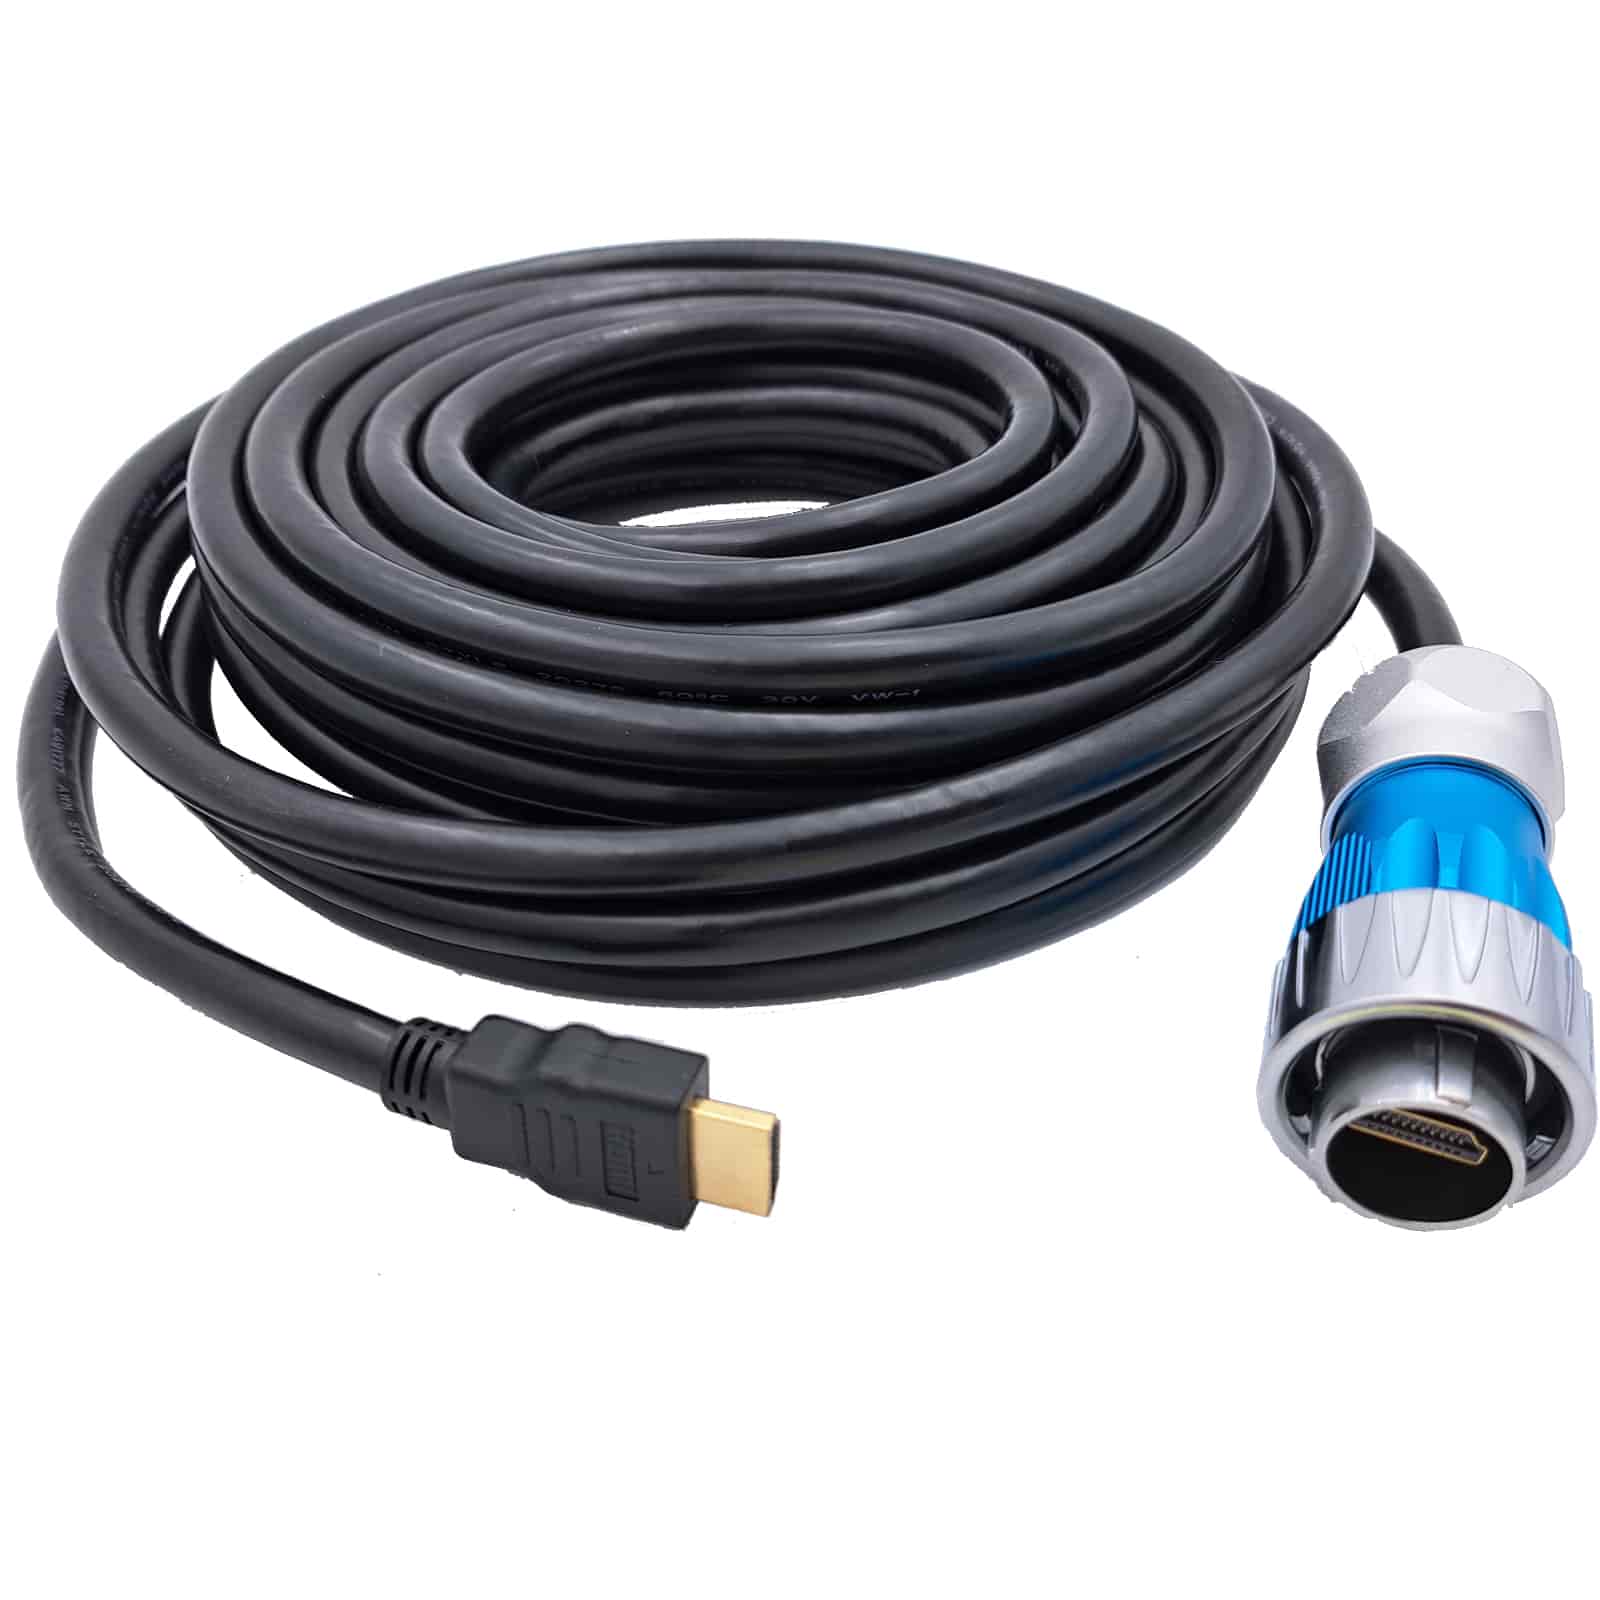 CNLINKO DH-24 Series Cable HDMI 10 m | ENOVA Solutions AG Connectors & Cables English